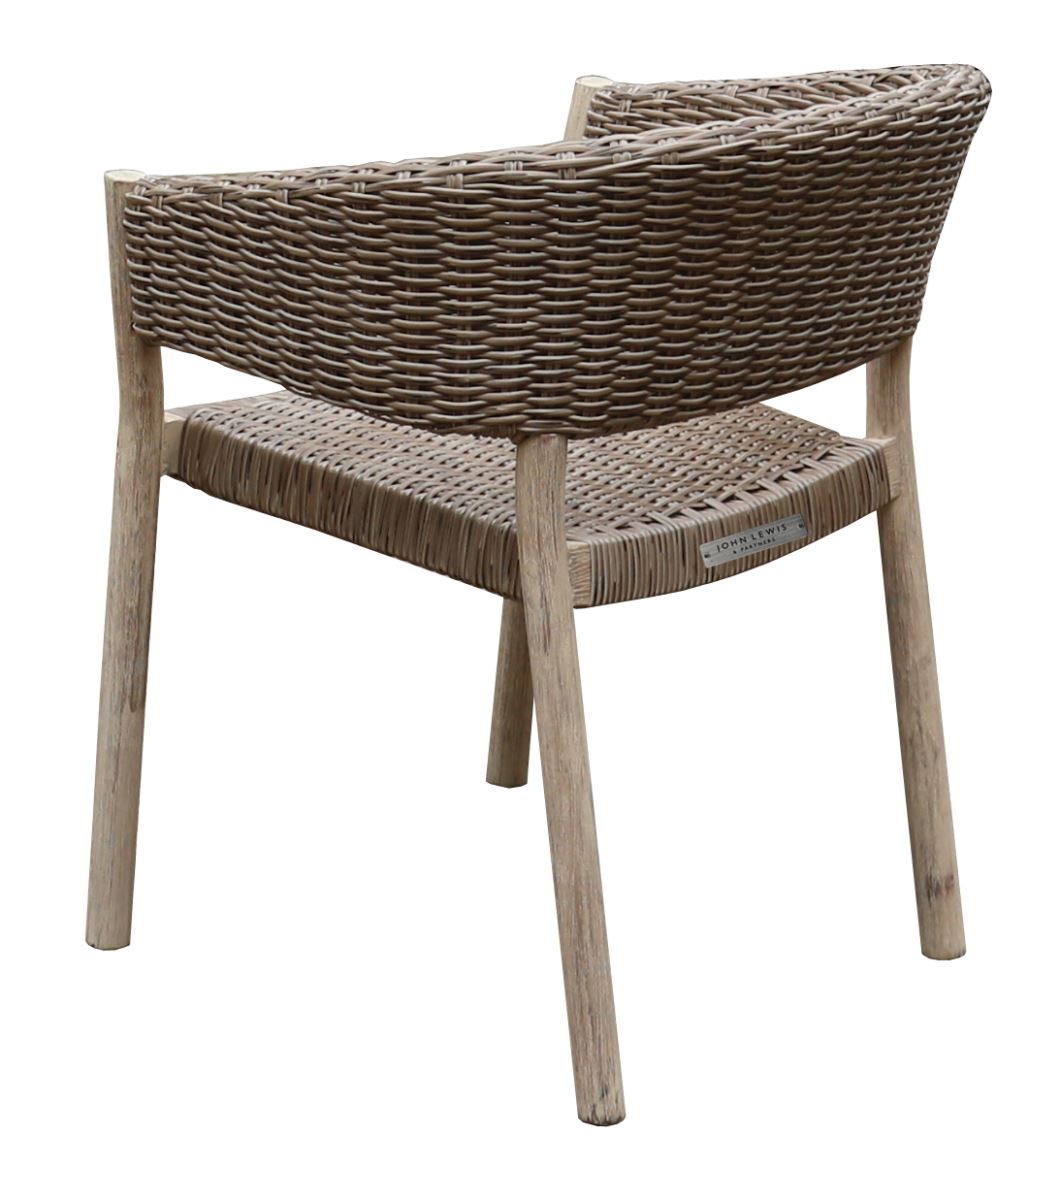 Dining chair wicker